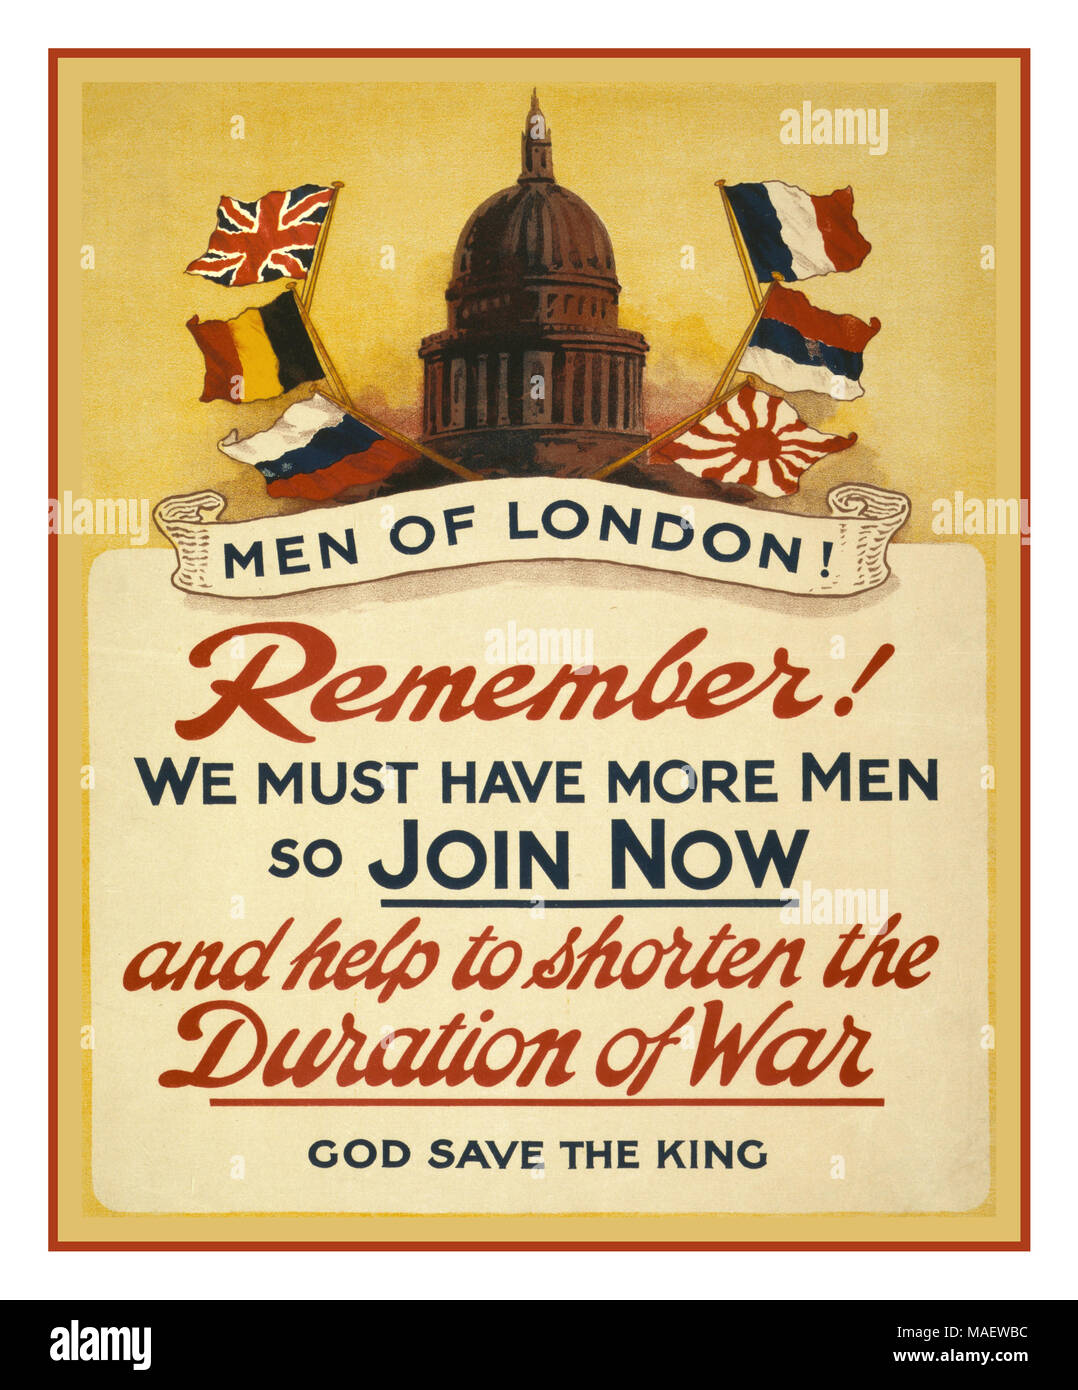 Vintage WW1 Recruitmen Poster 1915 “Men of London! Remember! We must have more men so join now and help to shorten the duration of the war. God save the king”  Poster showing the dome of St. Paul's Cathedral, London, with flags of the Allies. lithograph, 1915 Stock Photo